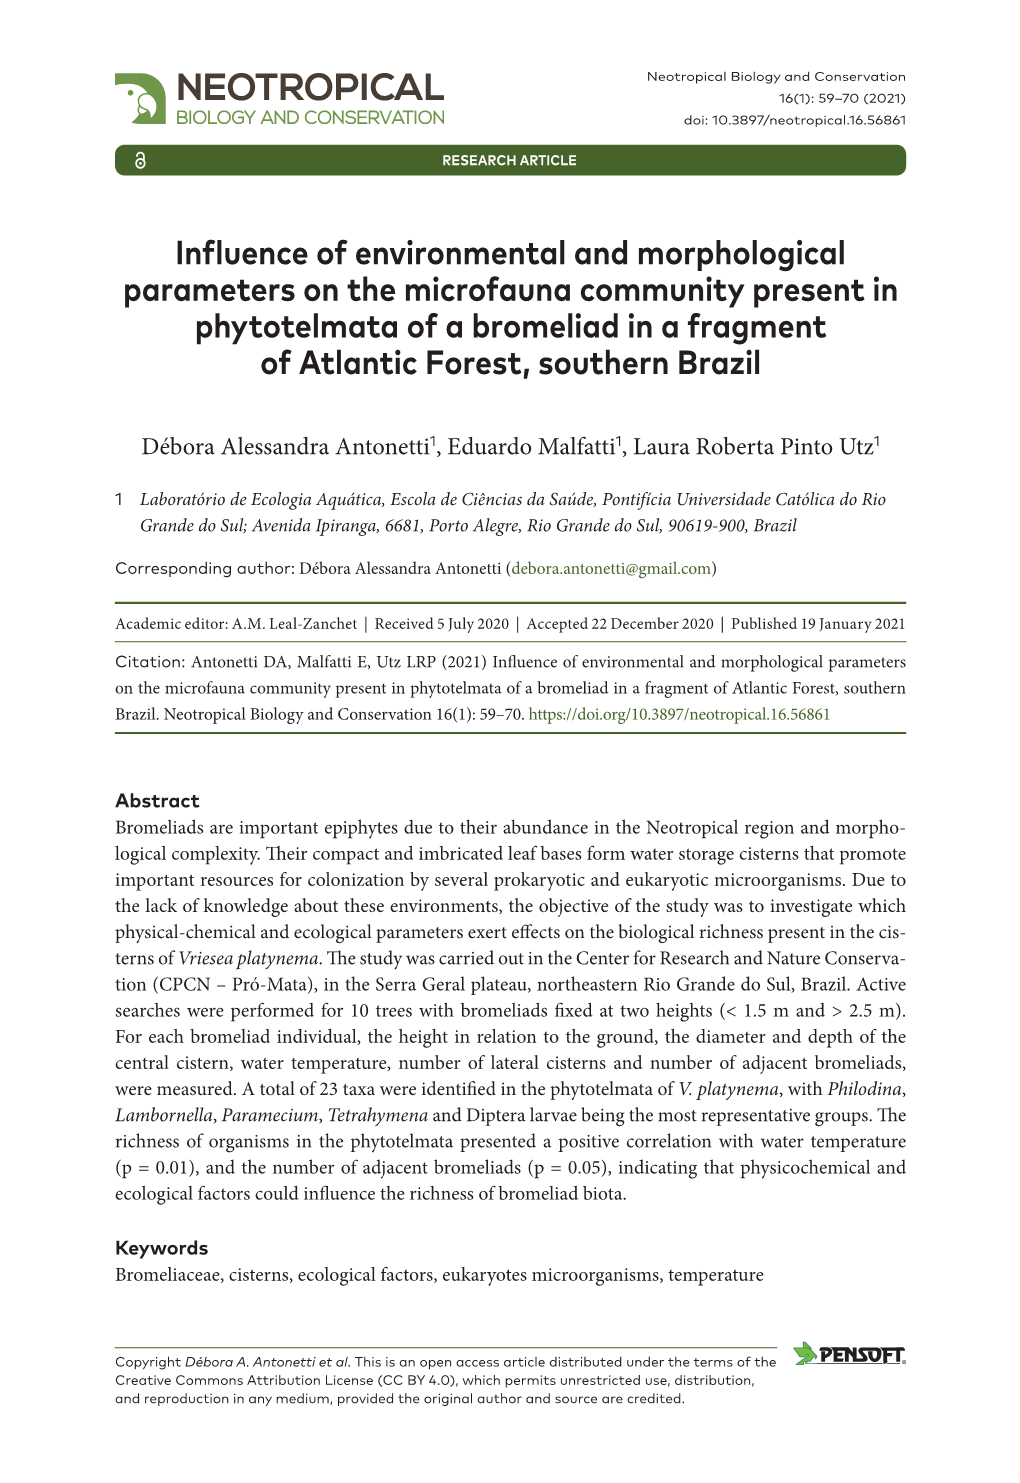 ﻿Influence of Environmental and Morphological Parameters on The